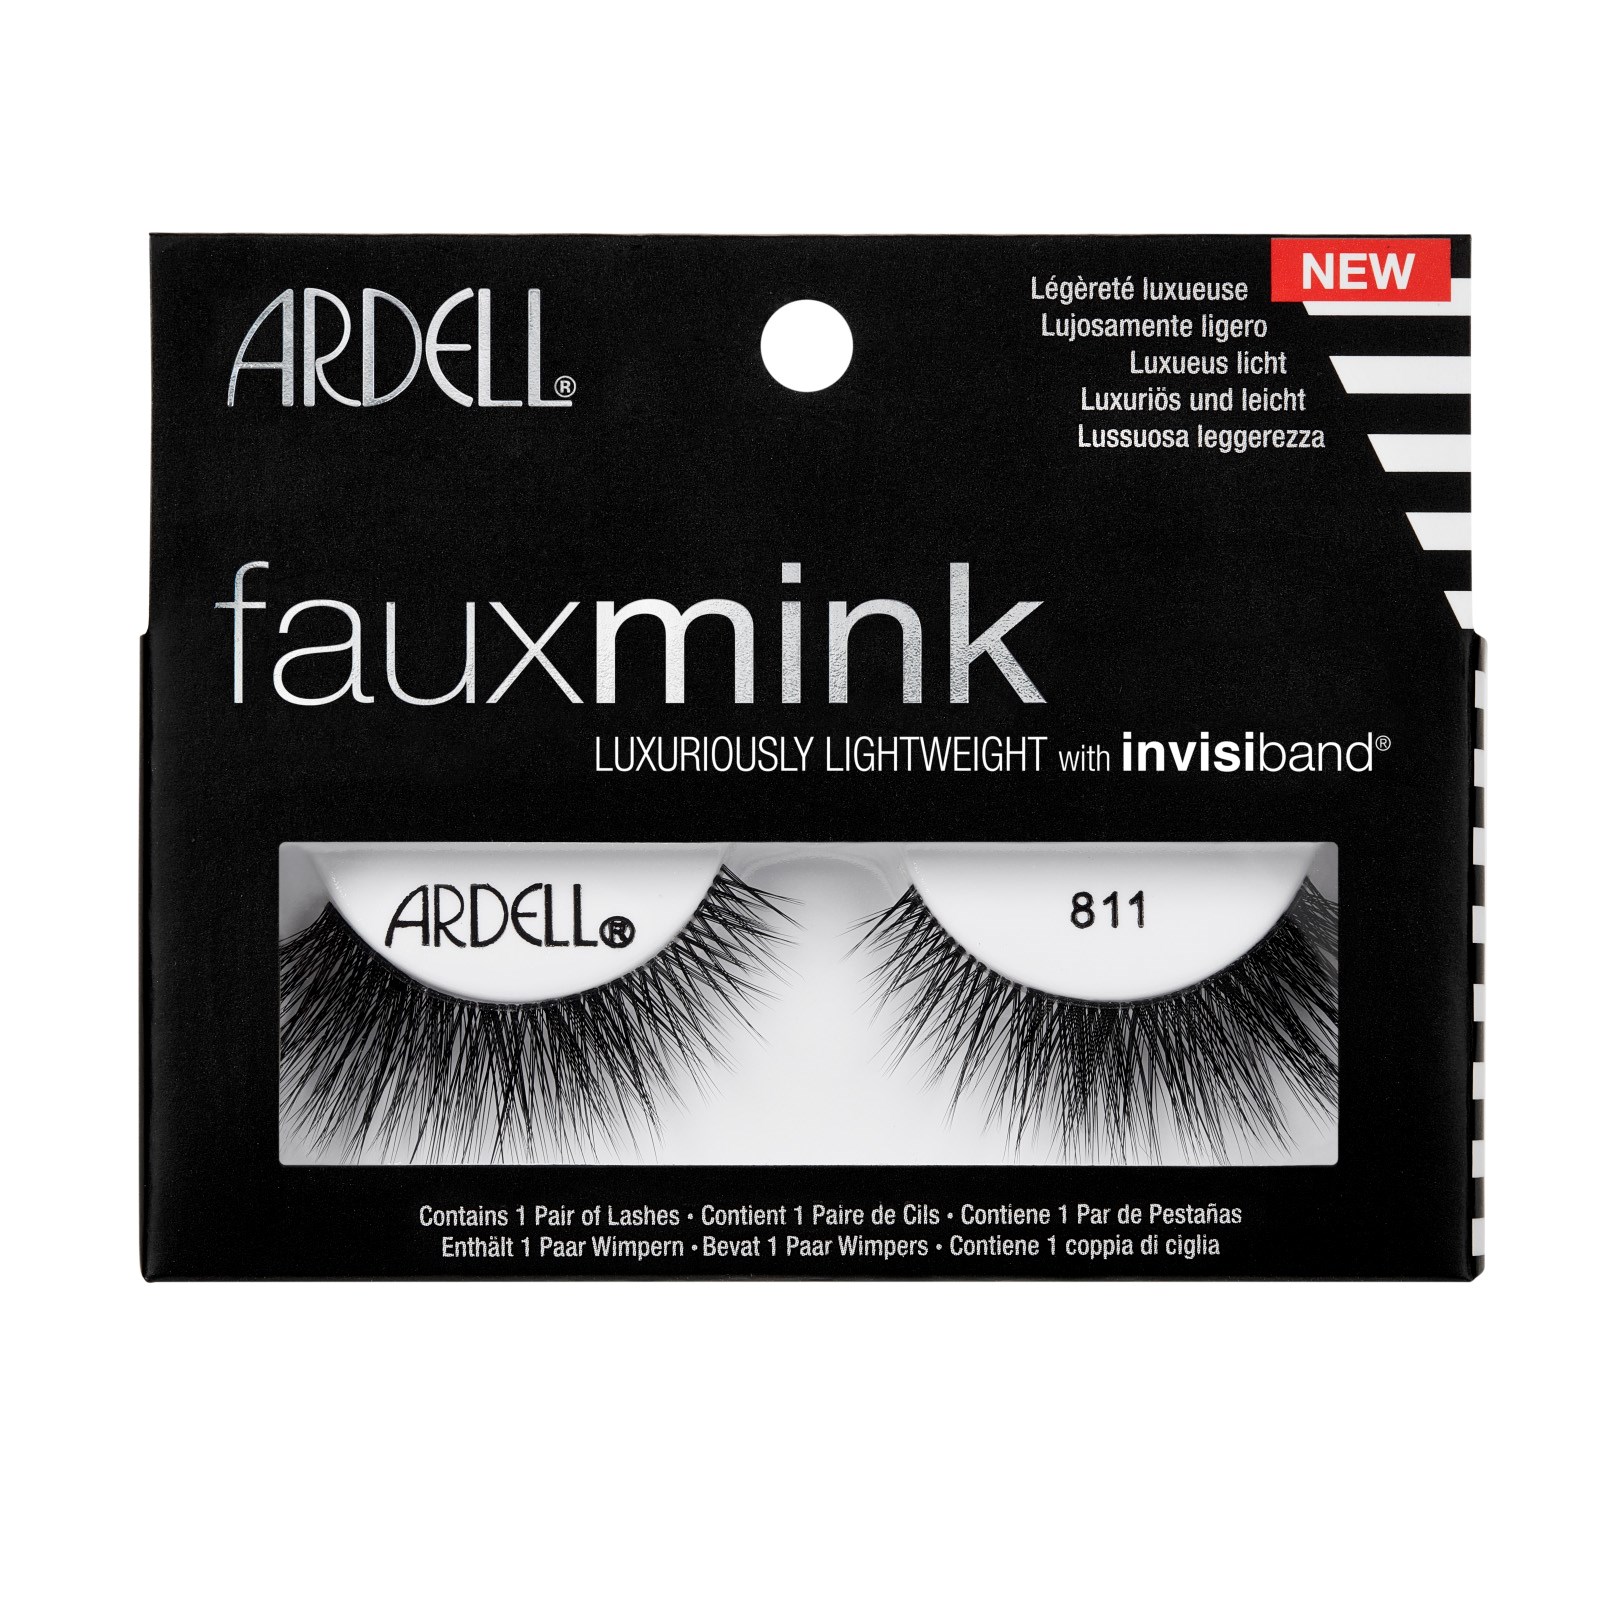 Ardell Faux Mink Luxuriously Lightweight Lashes 811